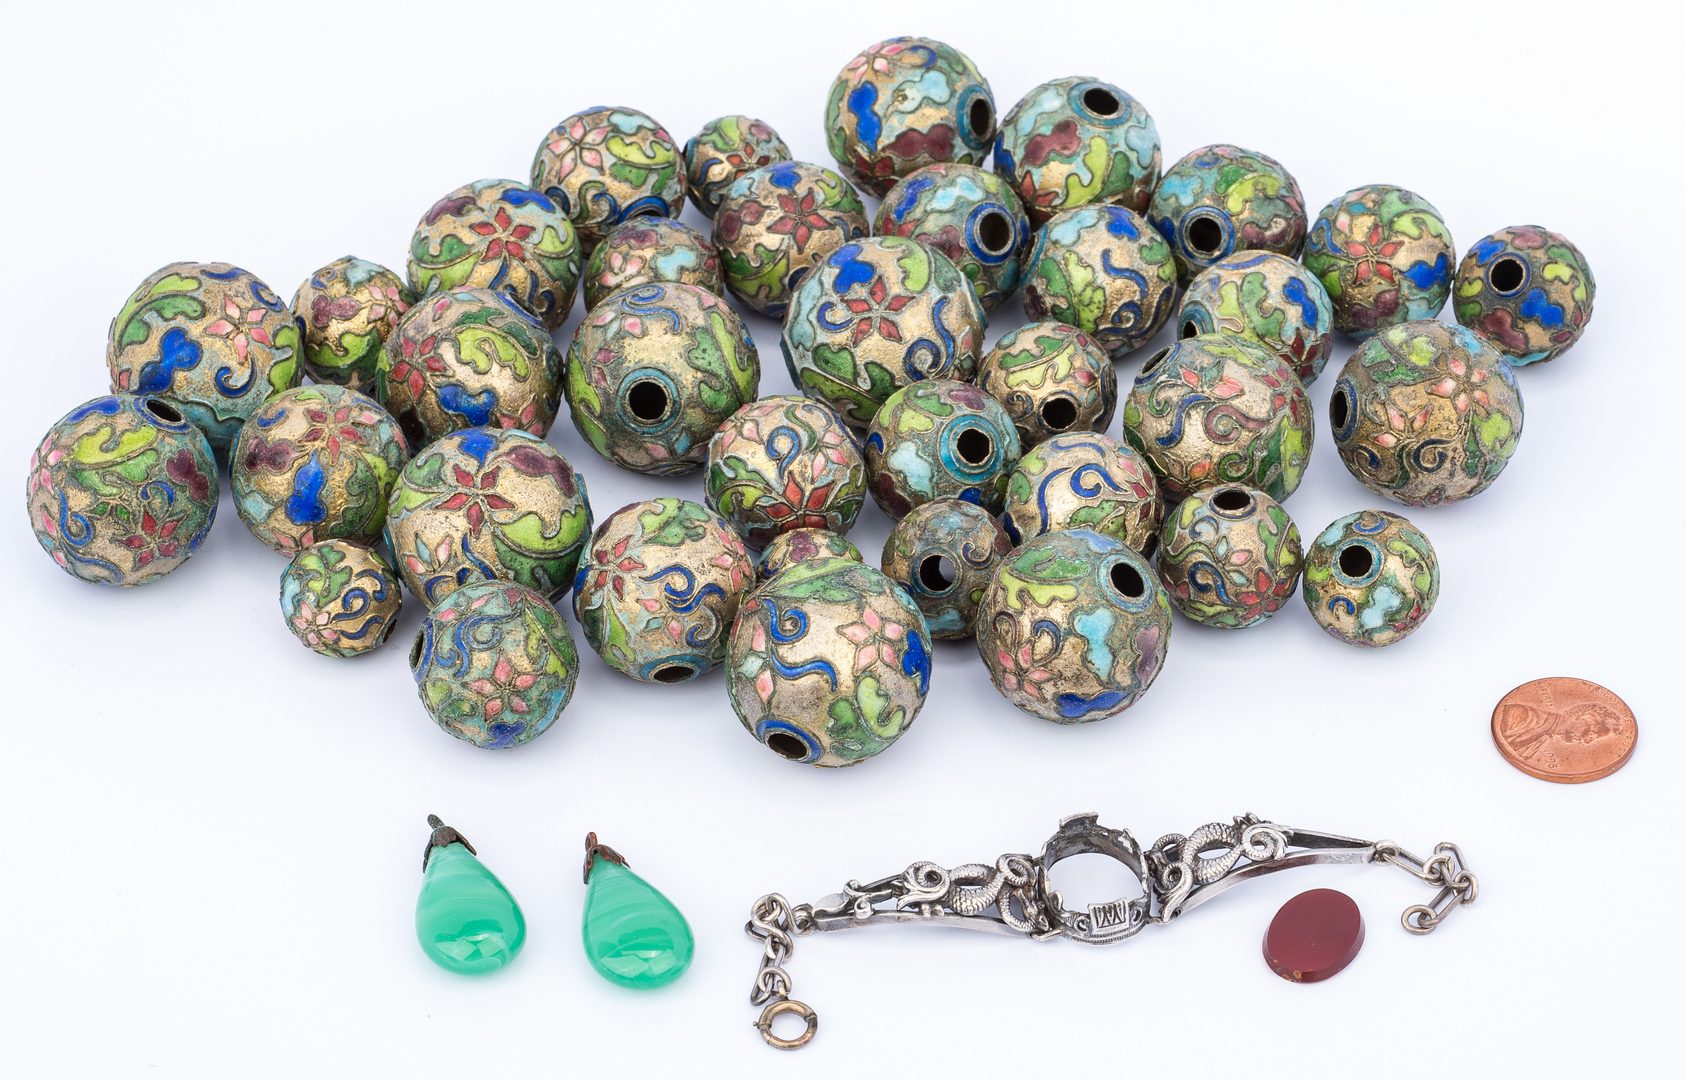 Lot 27: 3 Asian Jewelry Items, inc. Cloisonne Beads